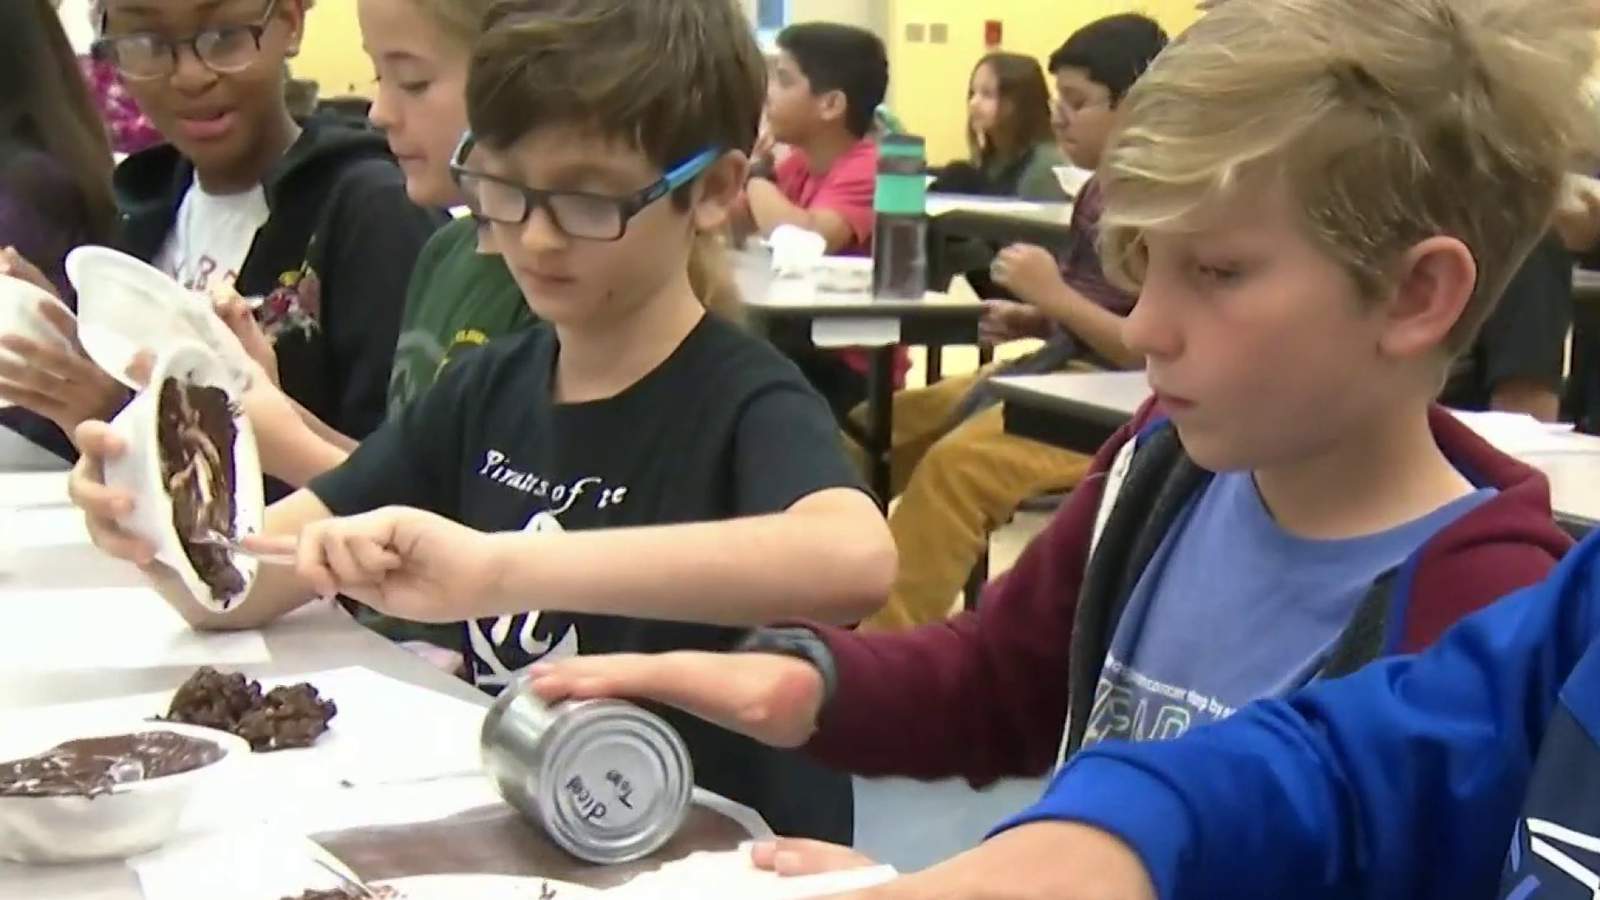 Elementary school students learn about engineering using chocolate